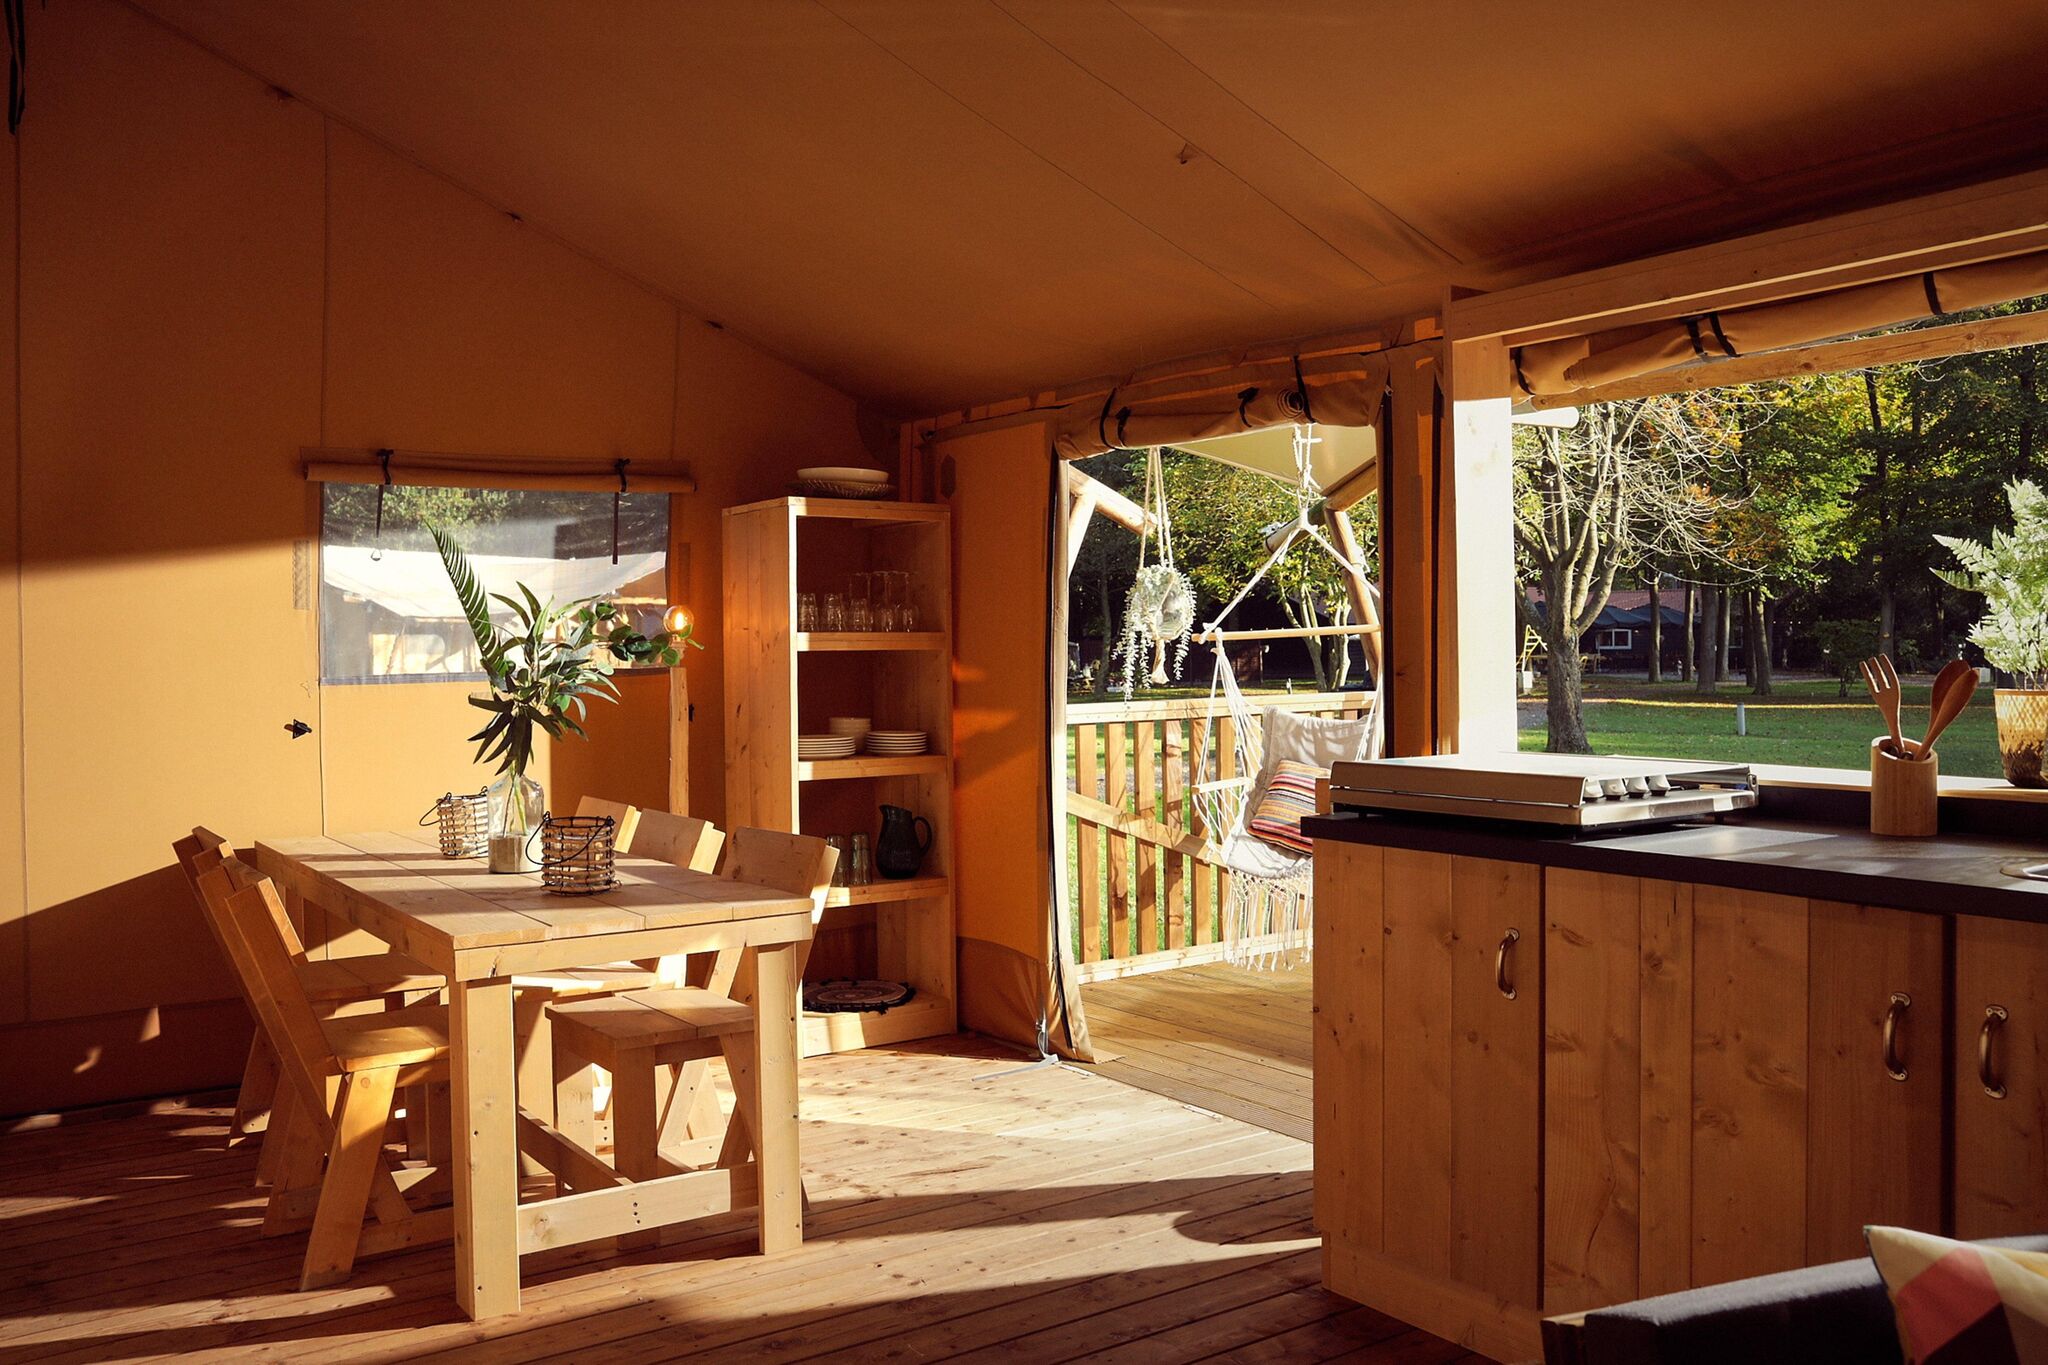 Luxury glamping in the Horsterwold